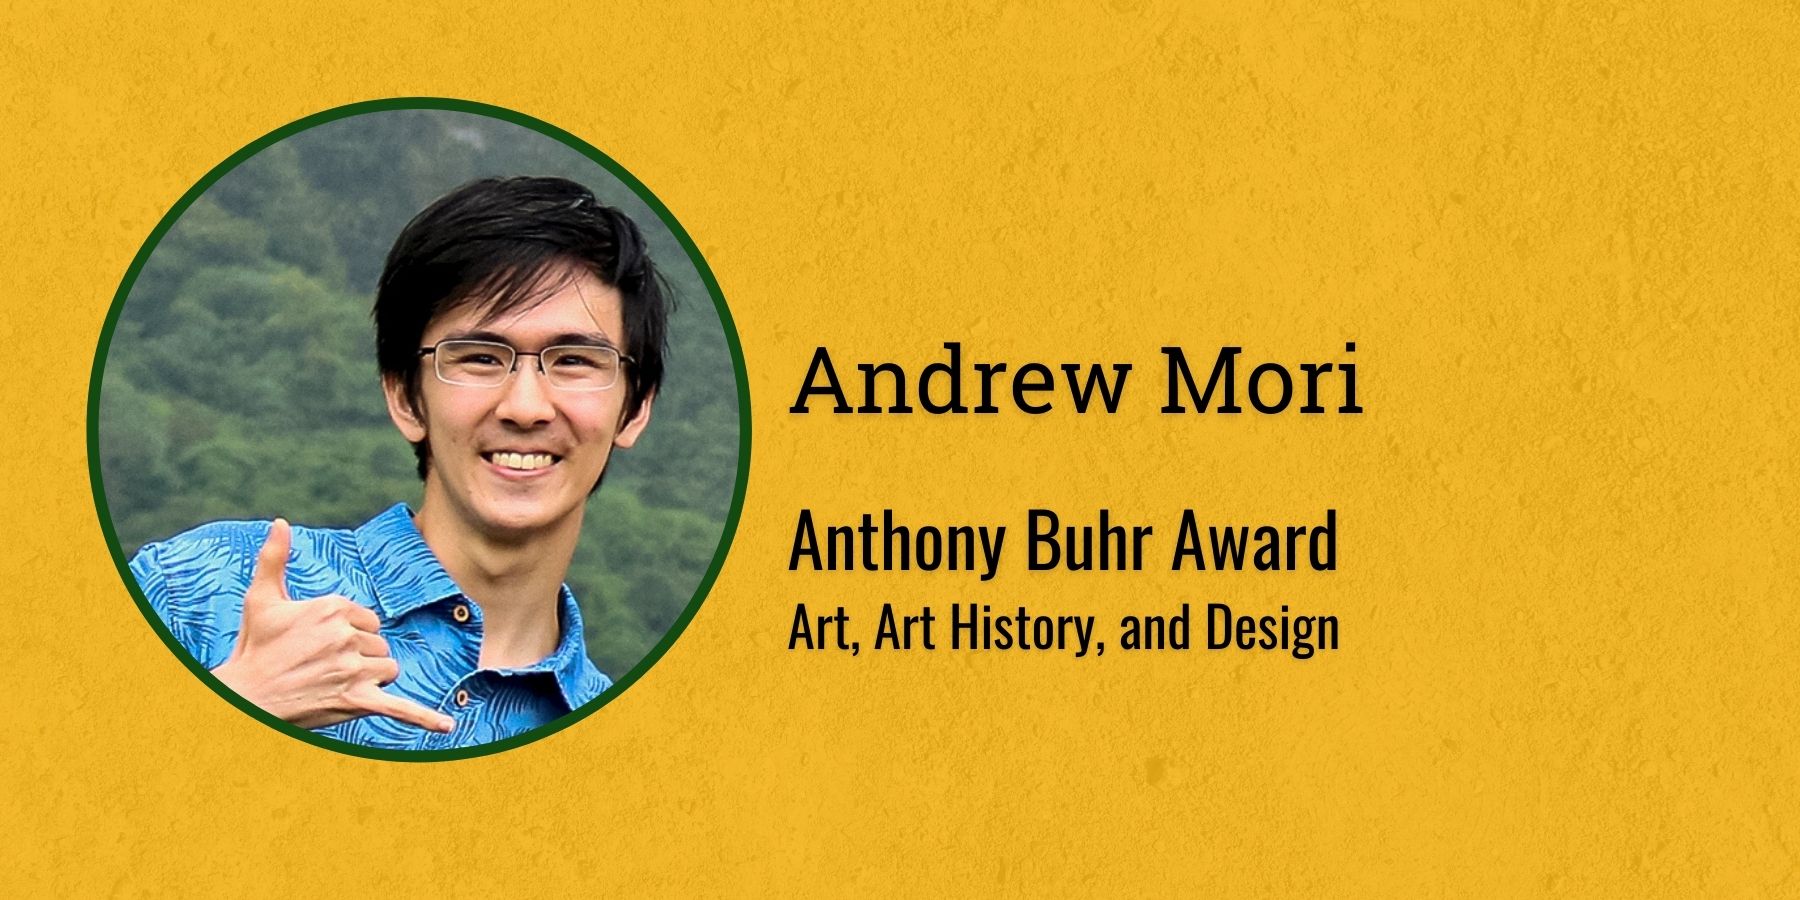 photo of Andrew Mori and text